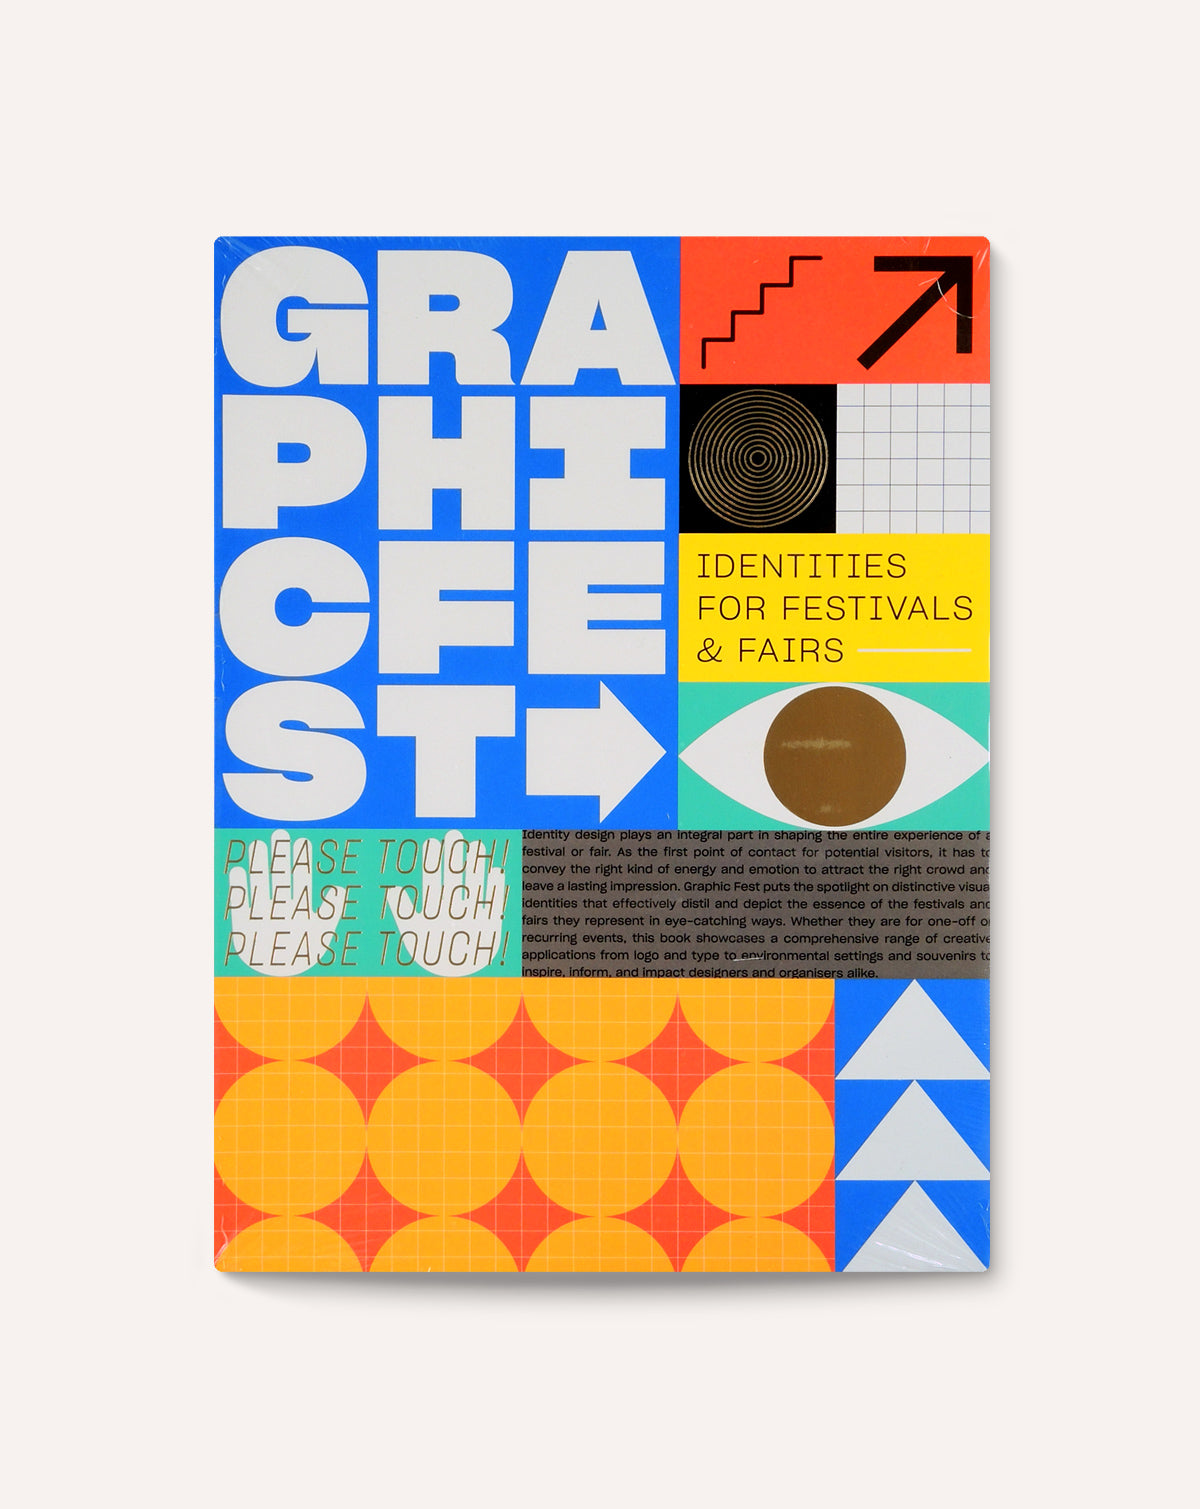 Graphic Fest: Identities for Festivals and Fairs